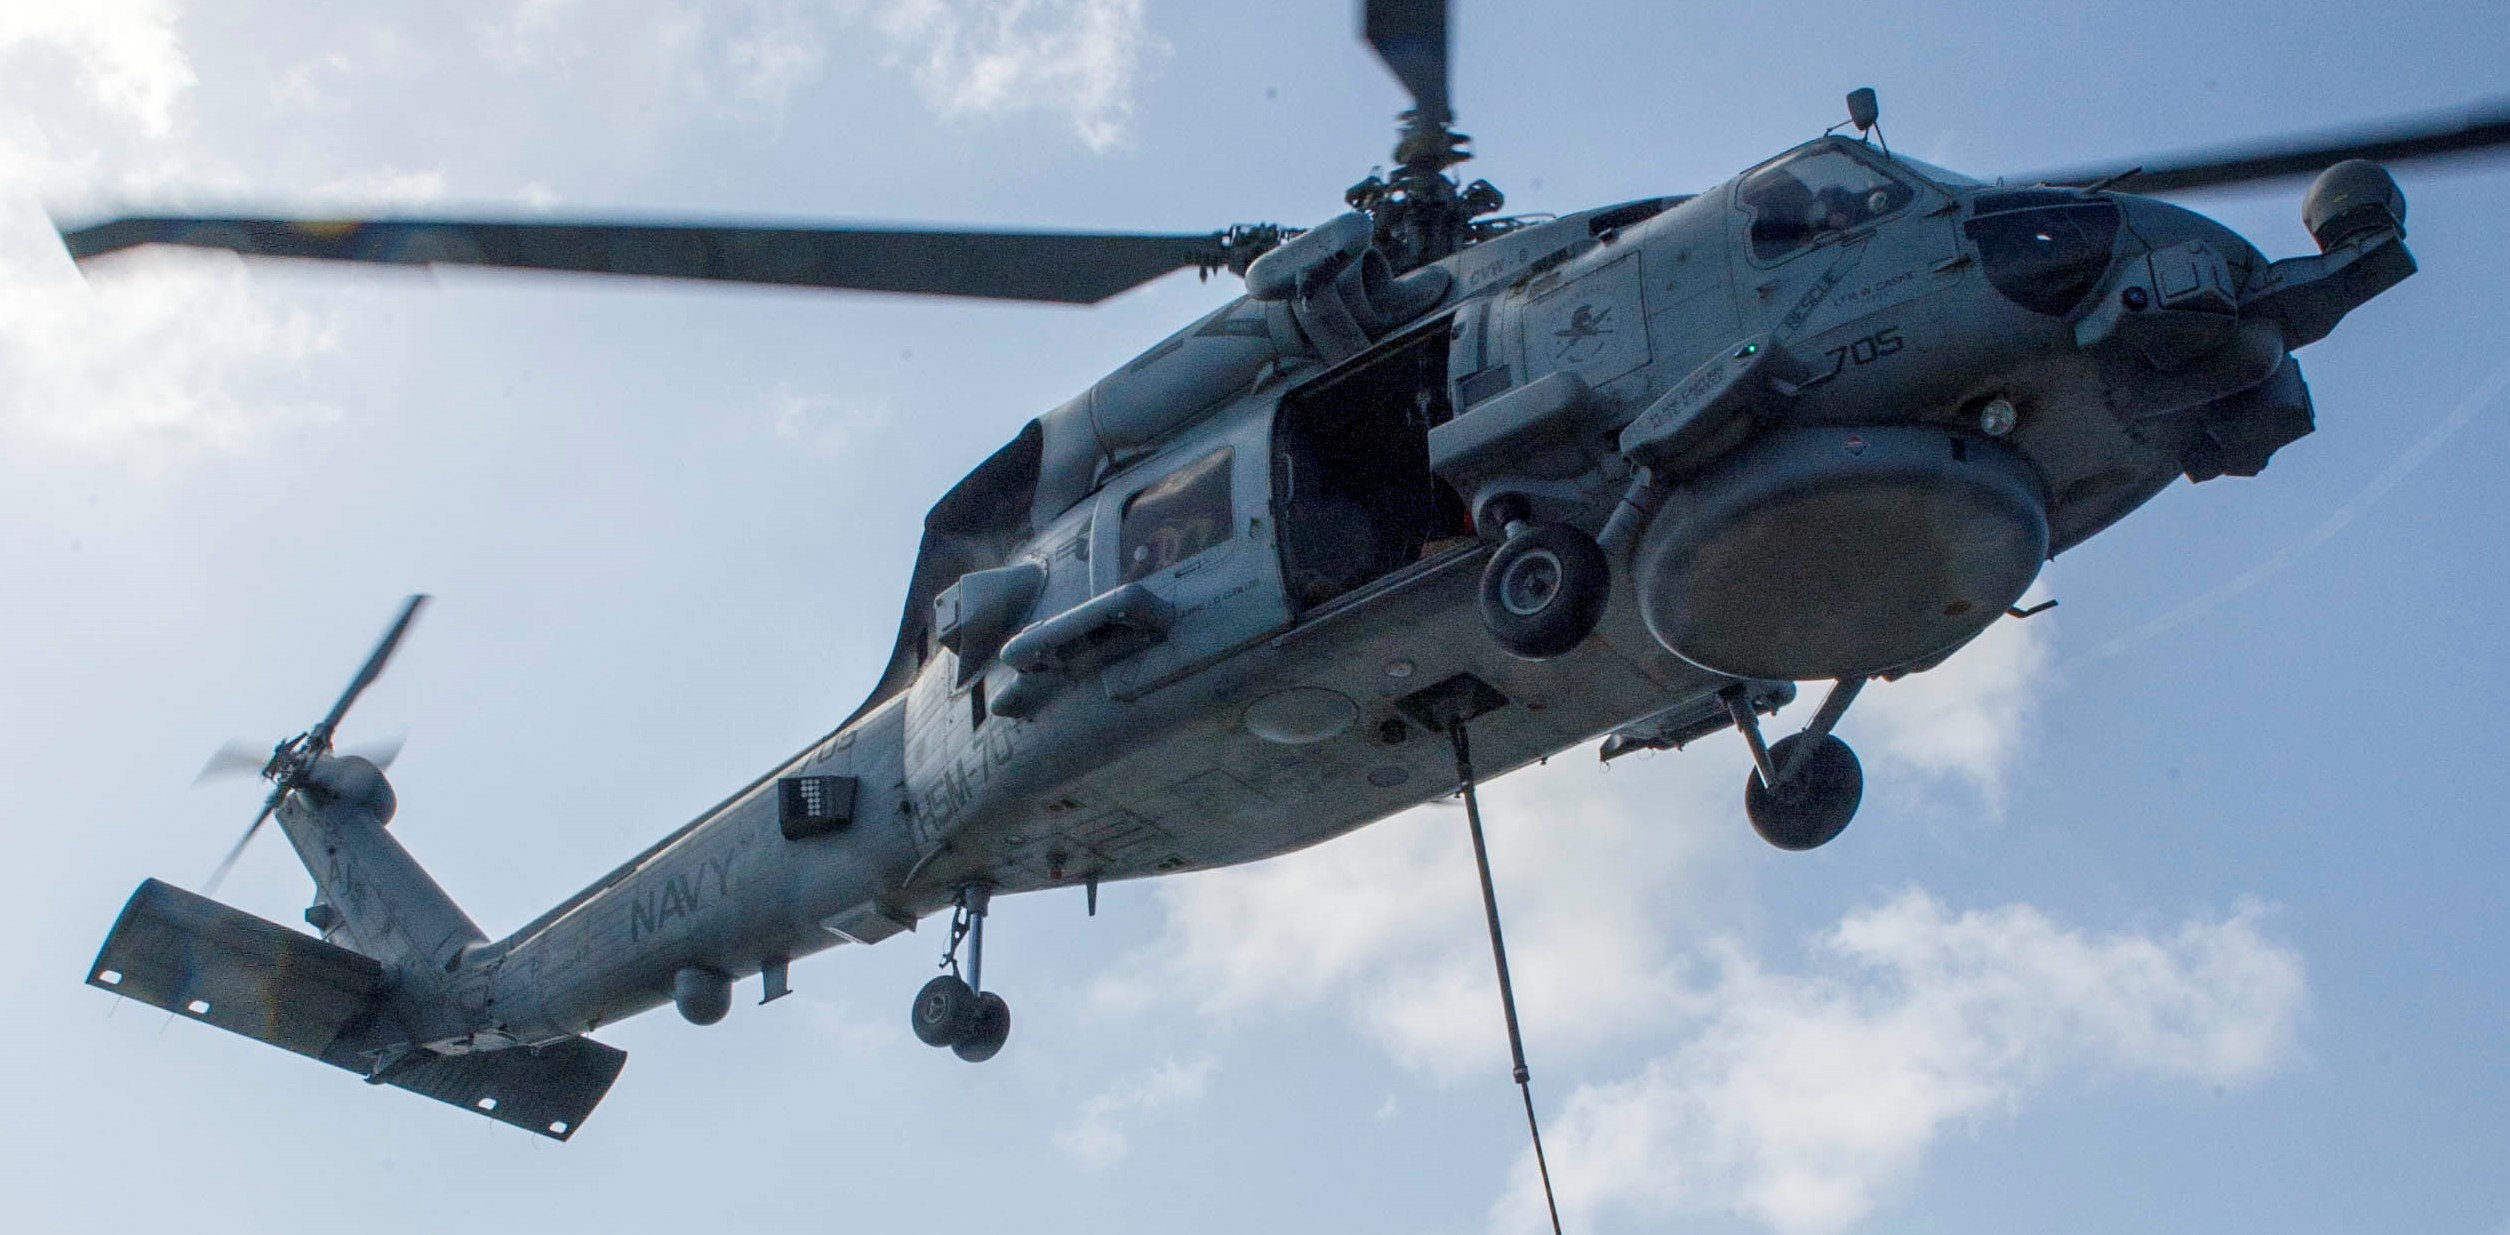 hsm-70 spartans helicopter maritime strike squadron mh-60r seahawk 2014 25